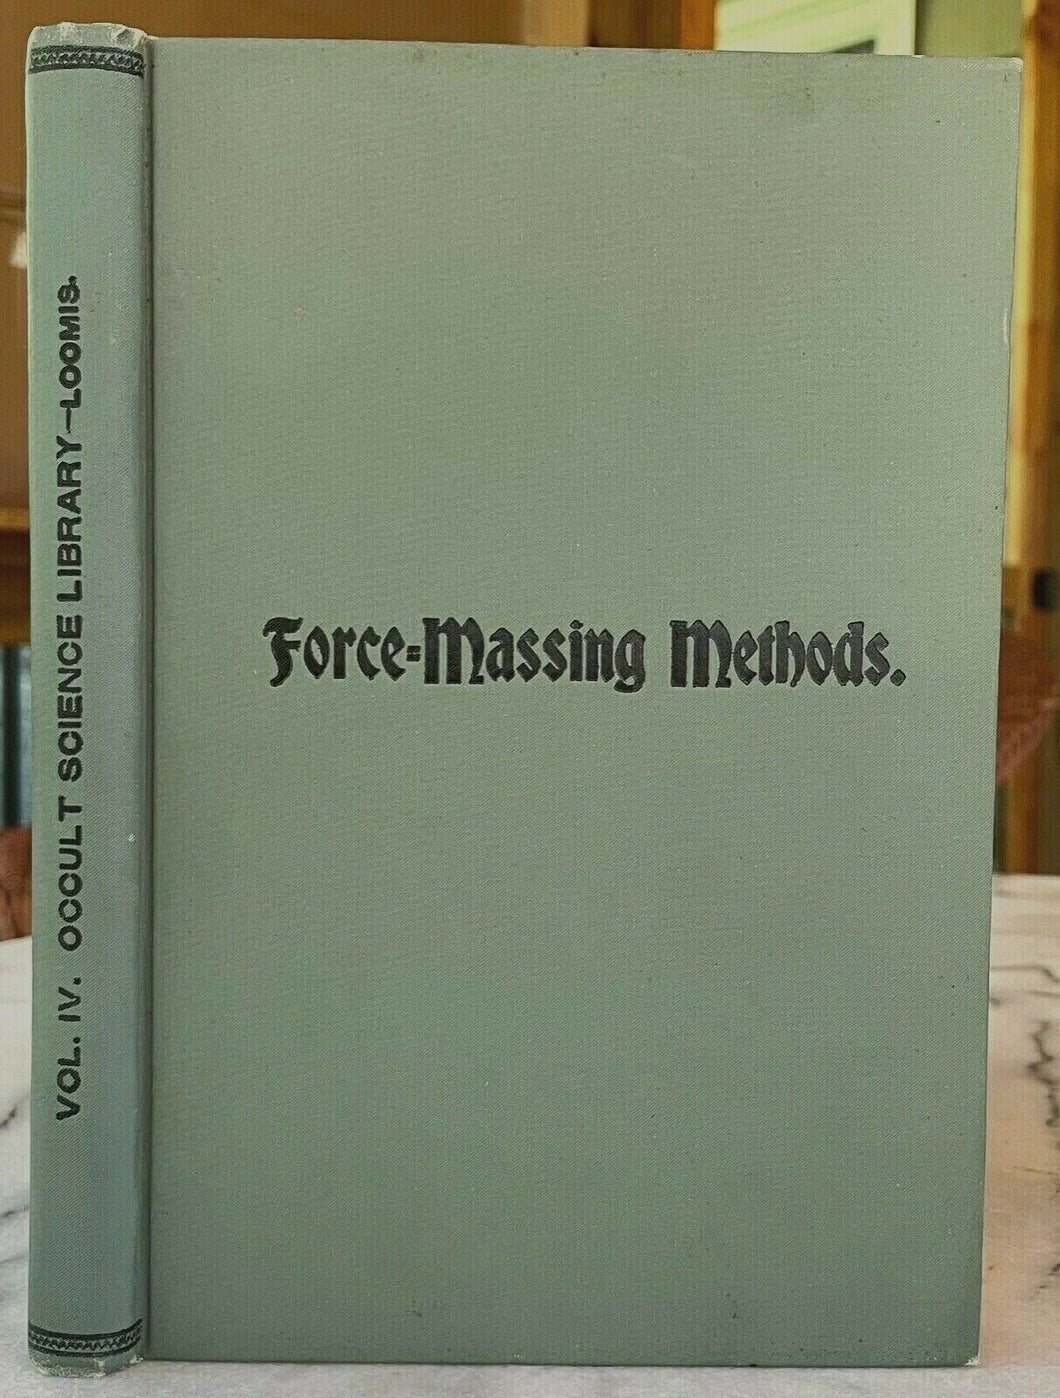 FORCE MASSING METHODS: How to Use Occult Forces - Loomis, 1st 1899 OCCULT HELP